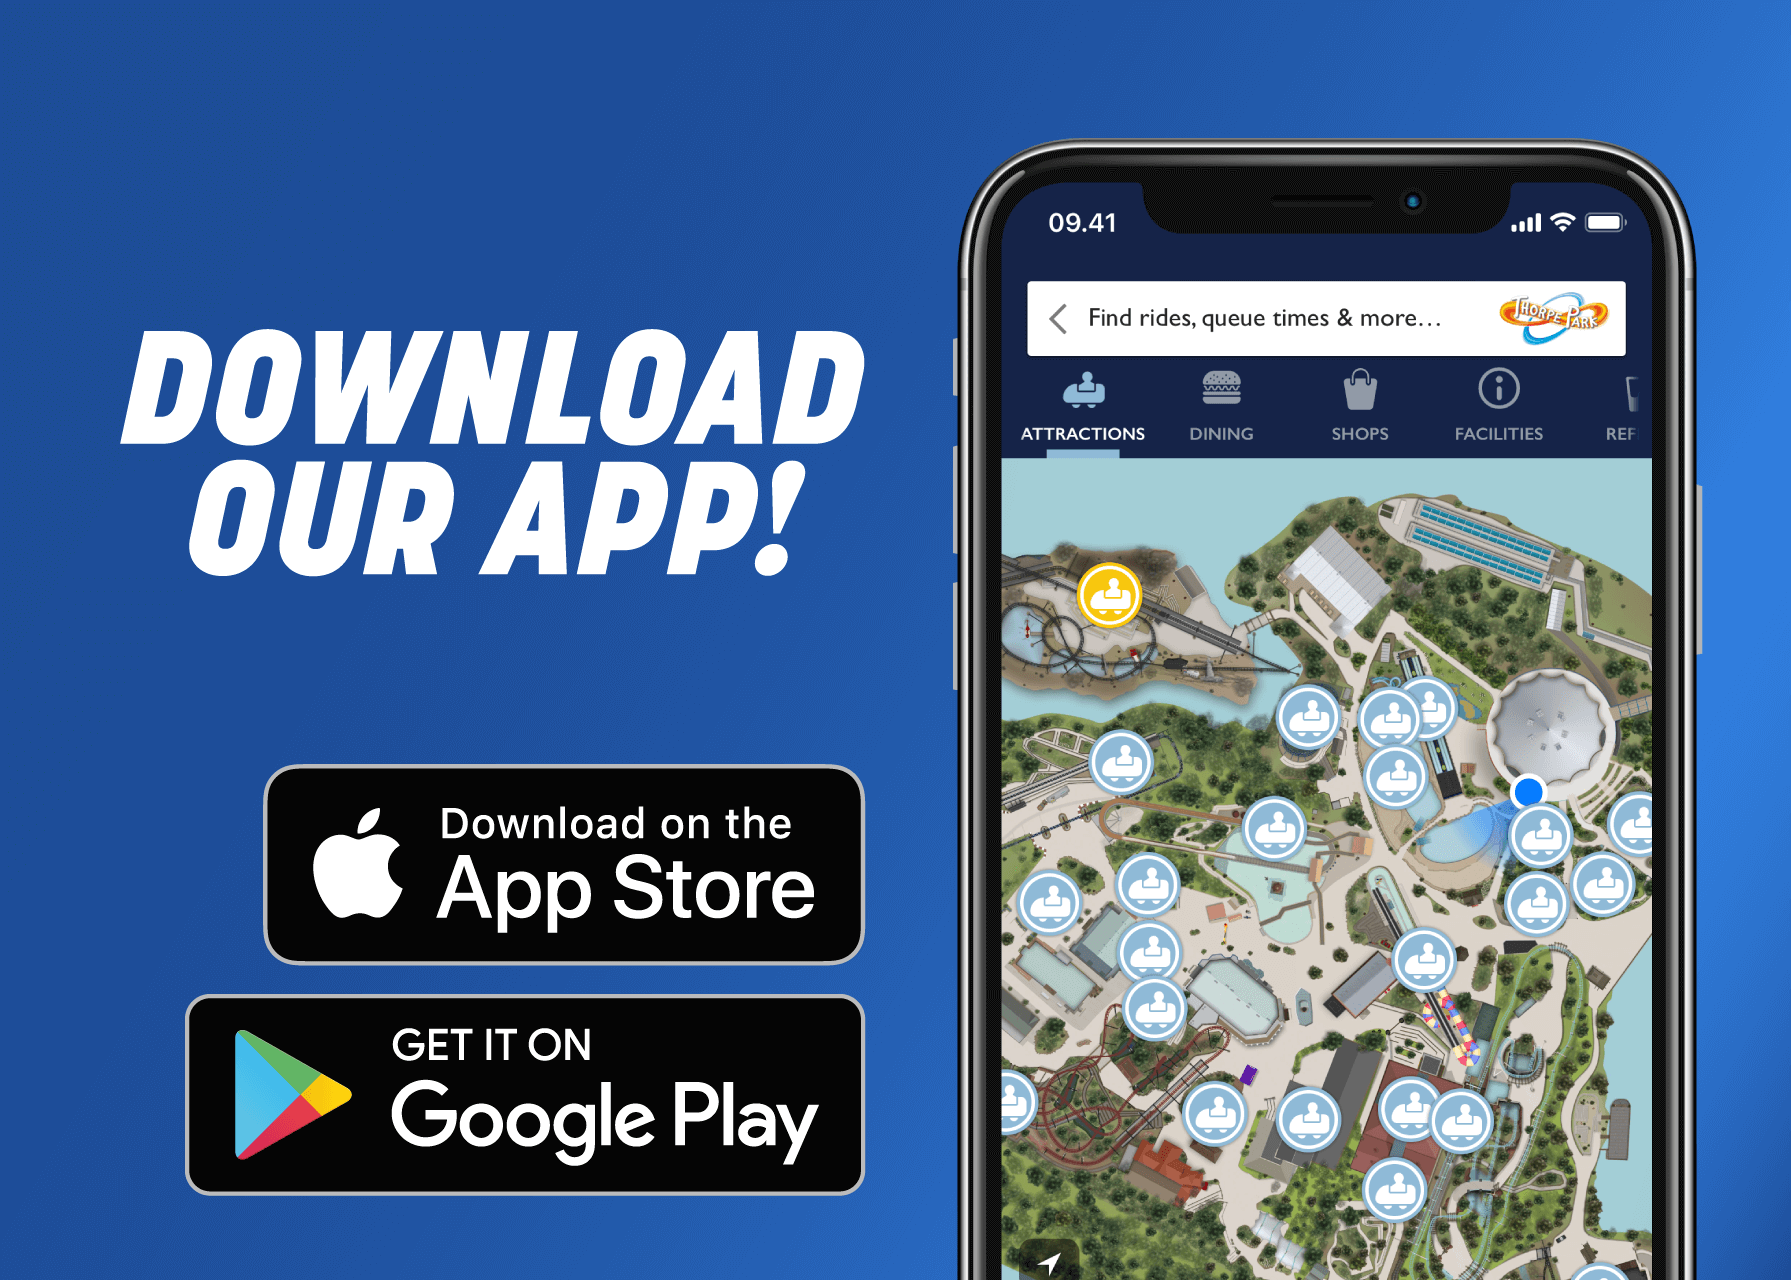 Thorpe Park App, Available On The App Store and Google Play